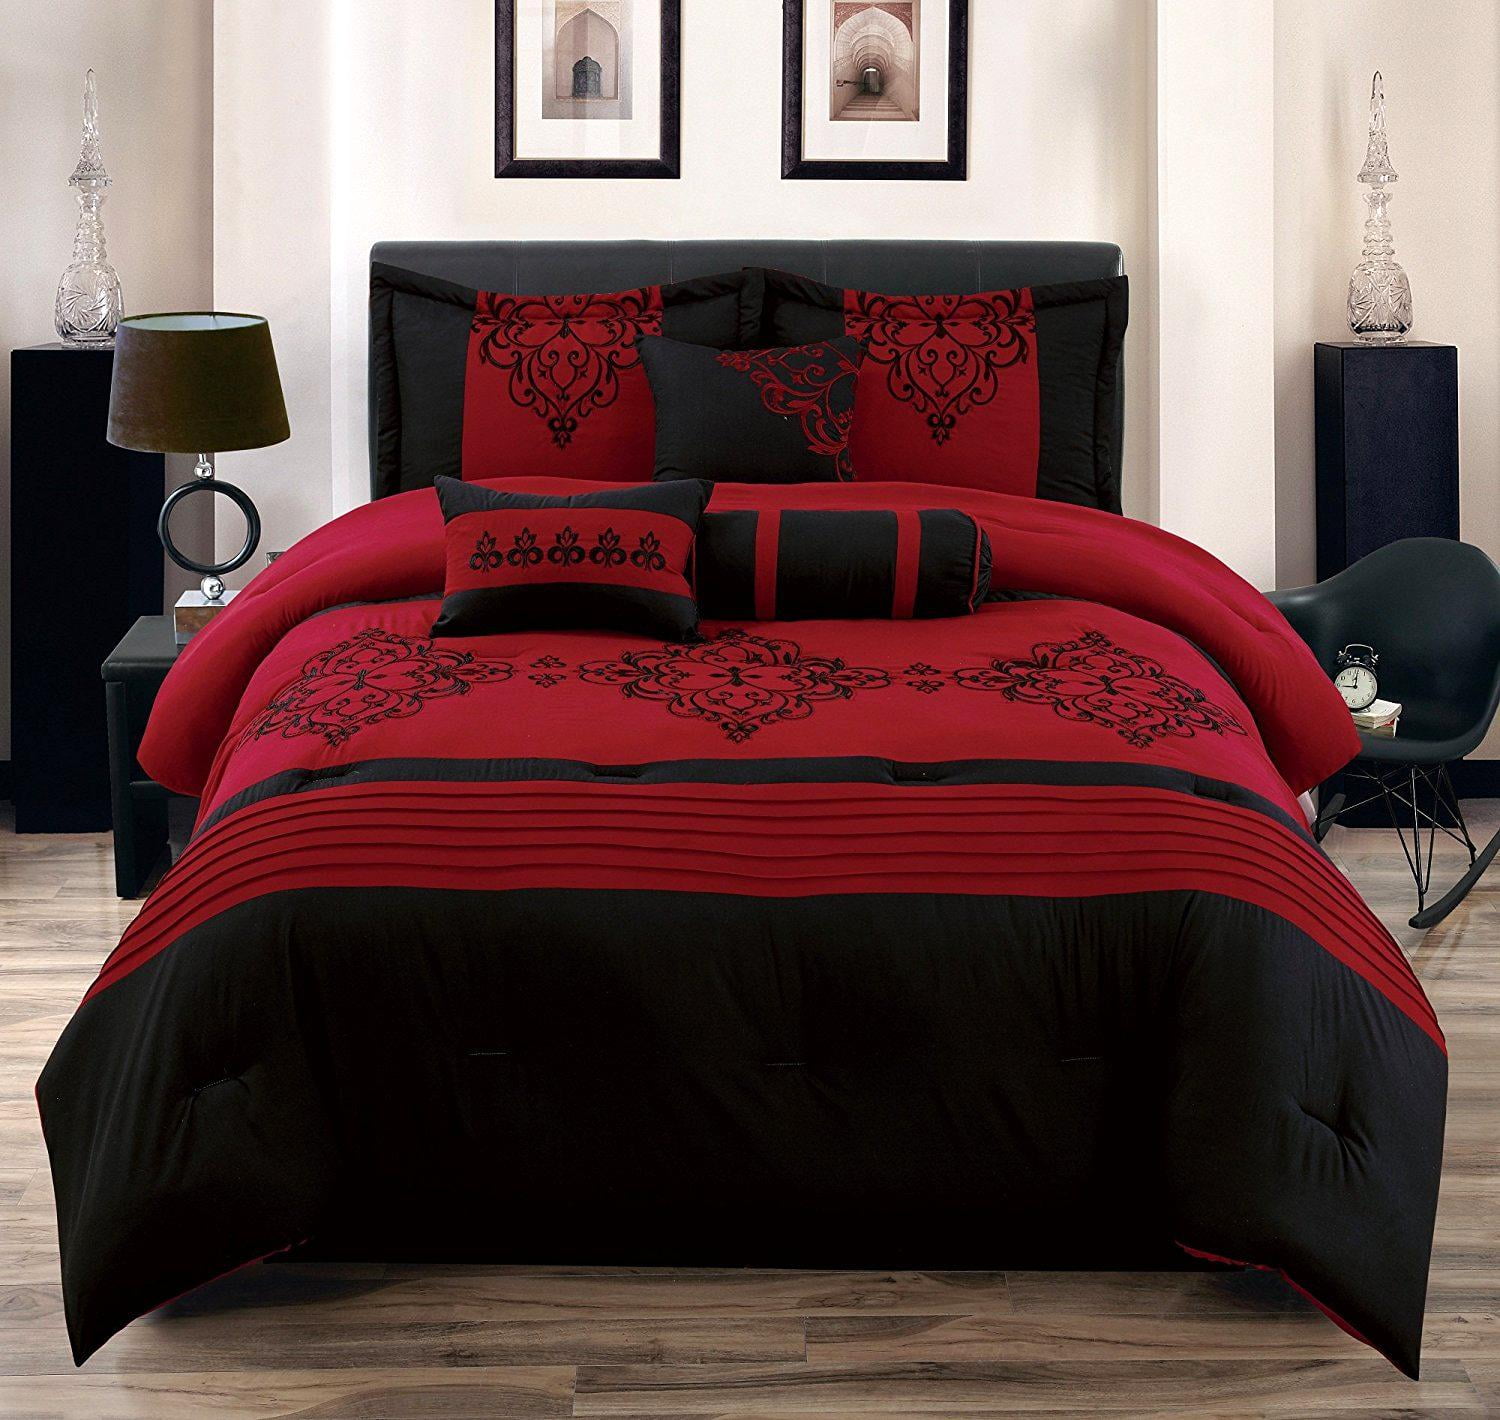 Heba Queen Size 7 Piece Comforter Set Red And Black Bed In A Bag Over Sized Embroidered Bedding